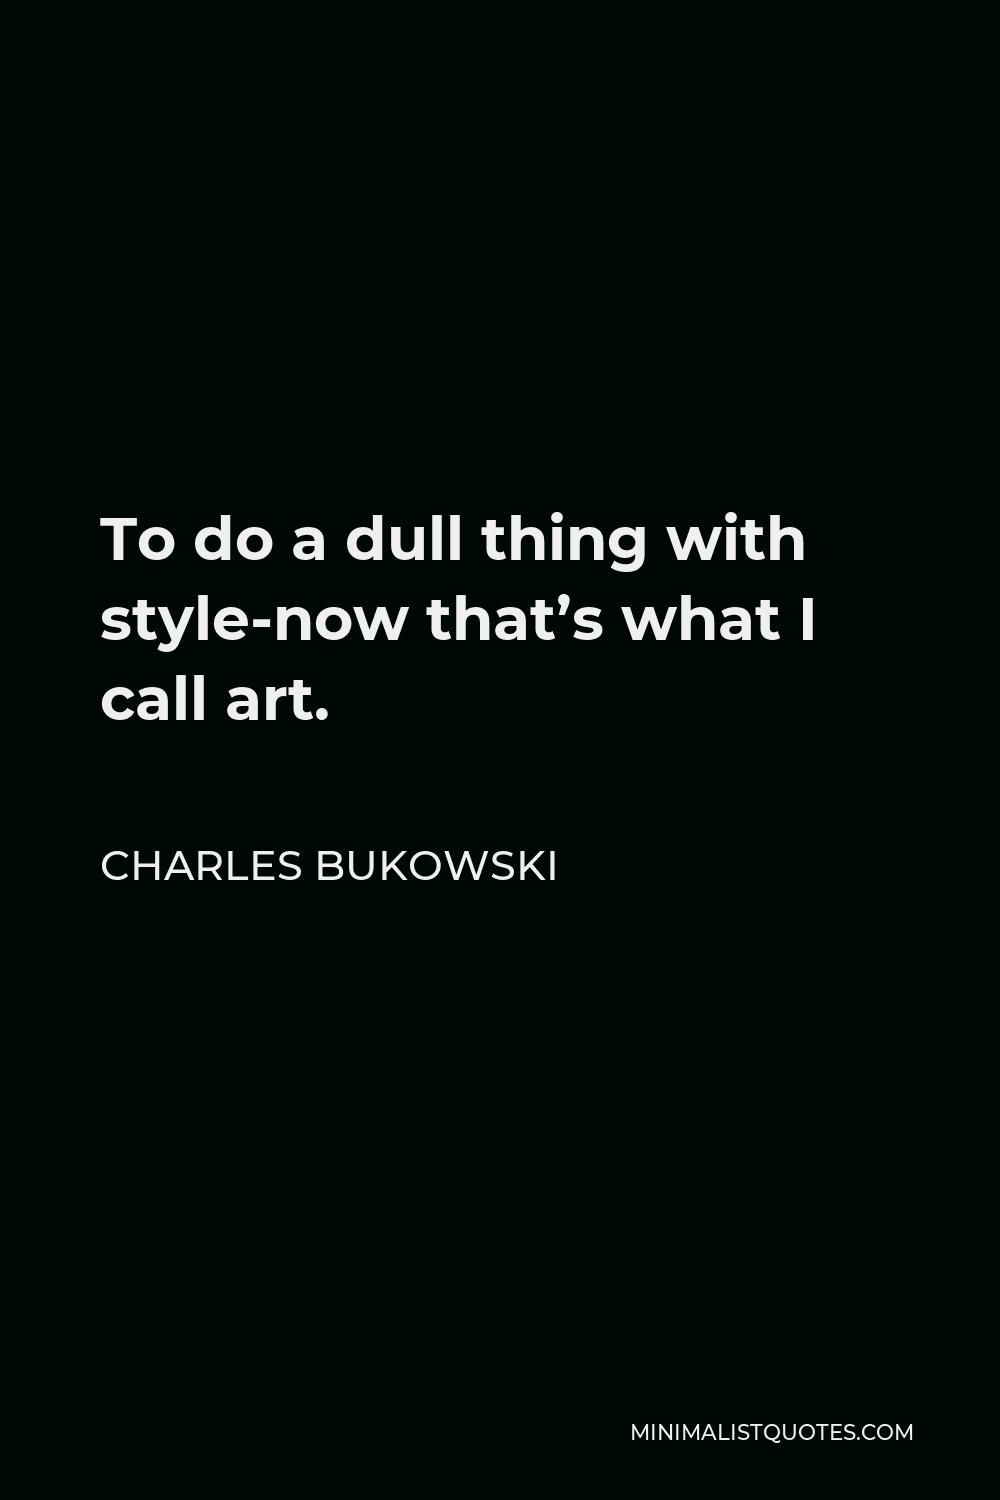 Charles Bukowski Quote - To do a dull thing with style-now that’s what I call art.